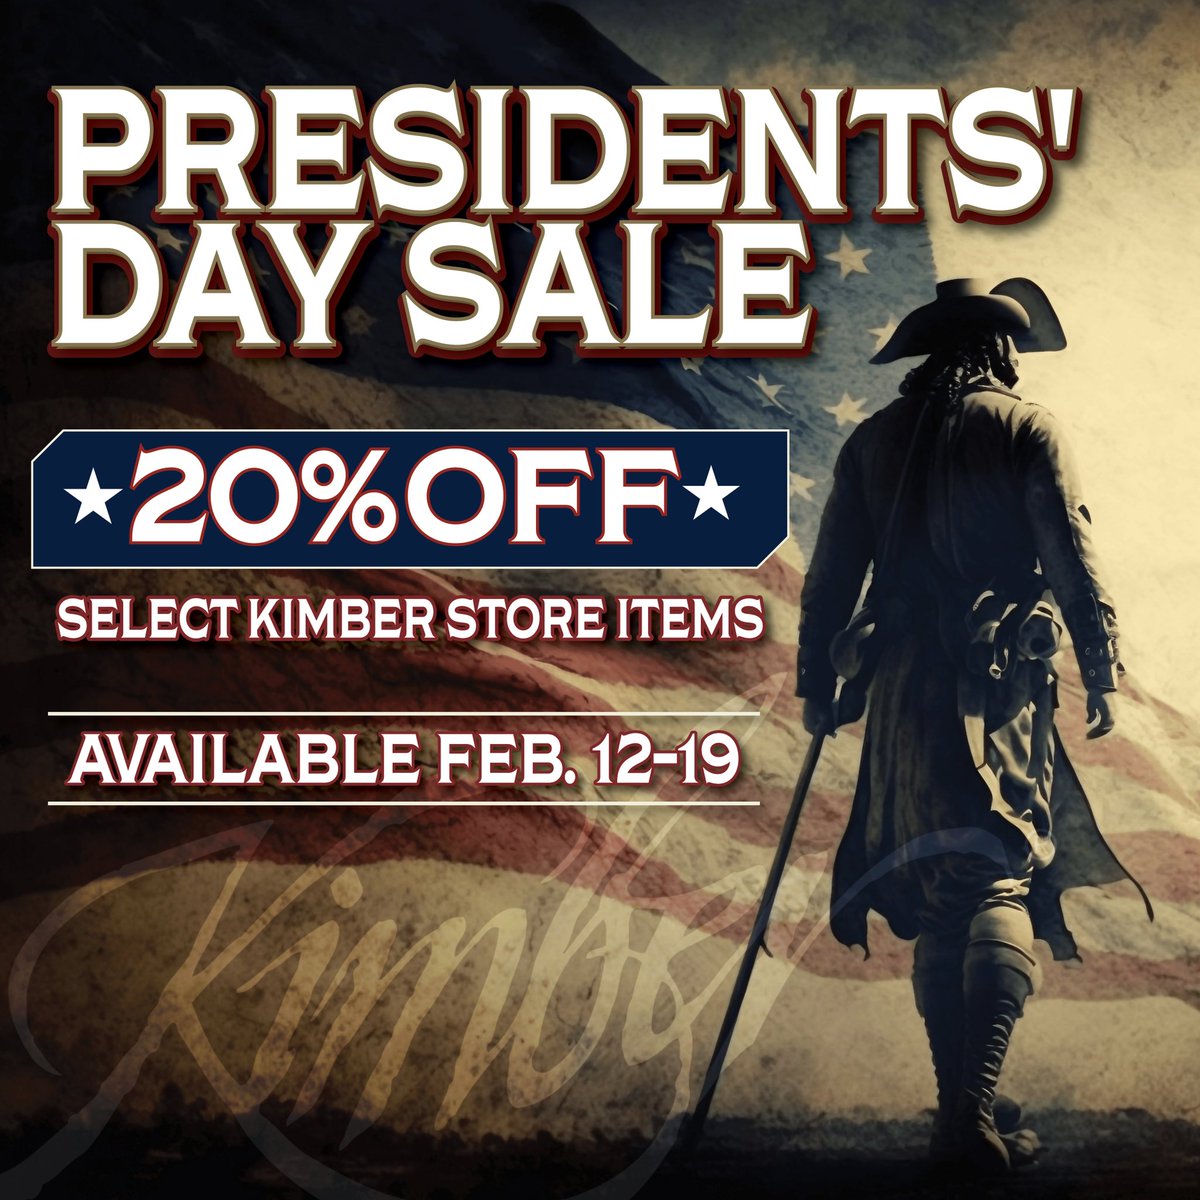 Now through February 19th 20% off select Kimber Store items.